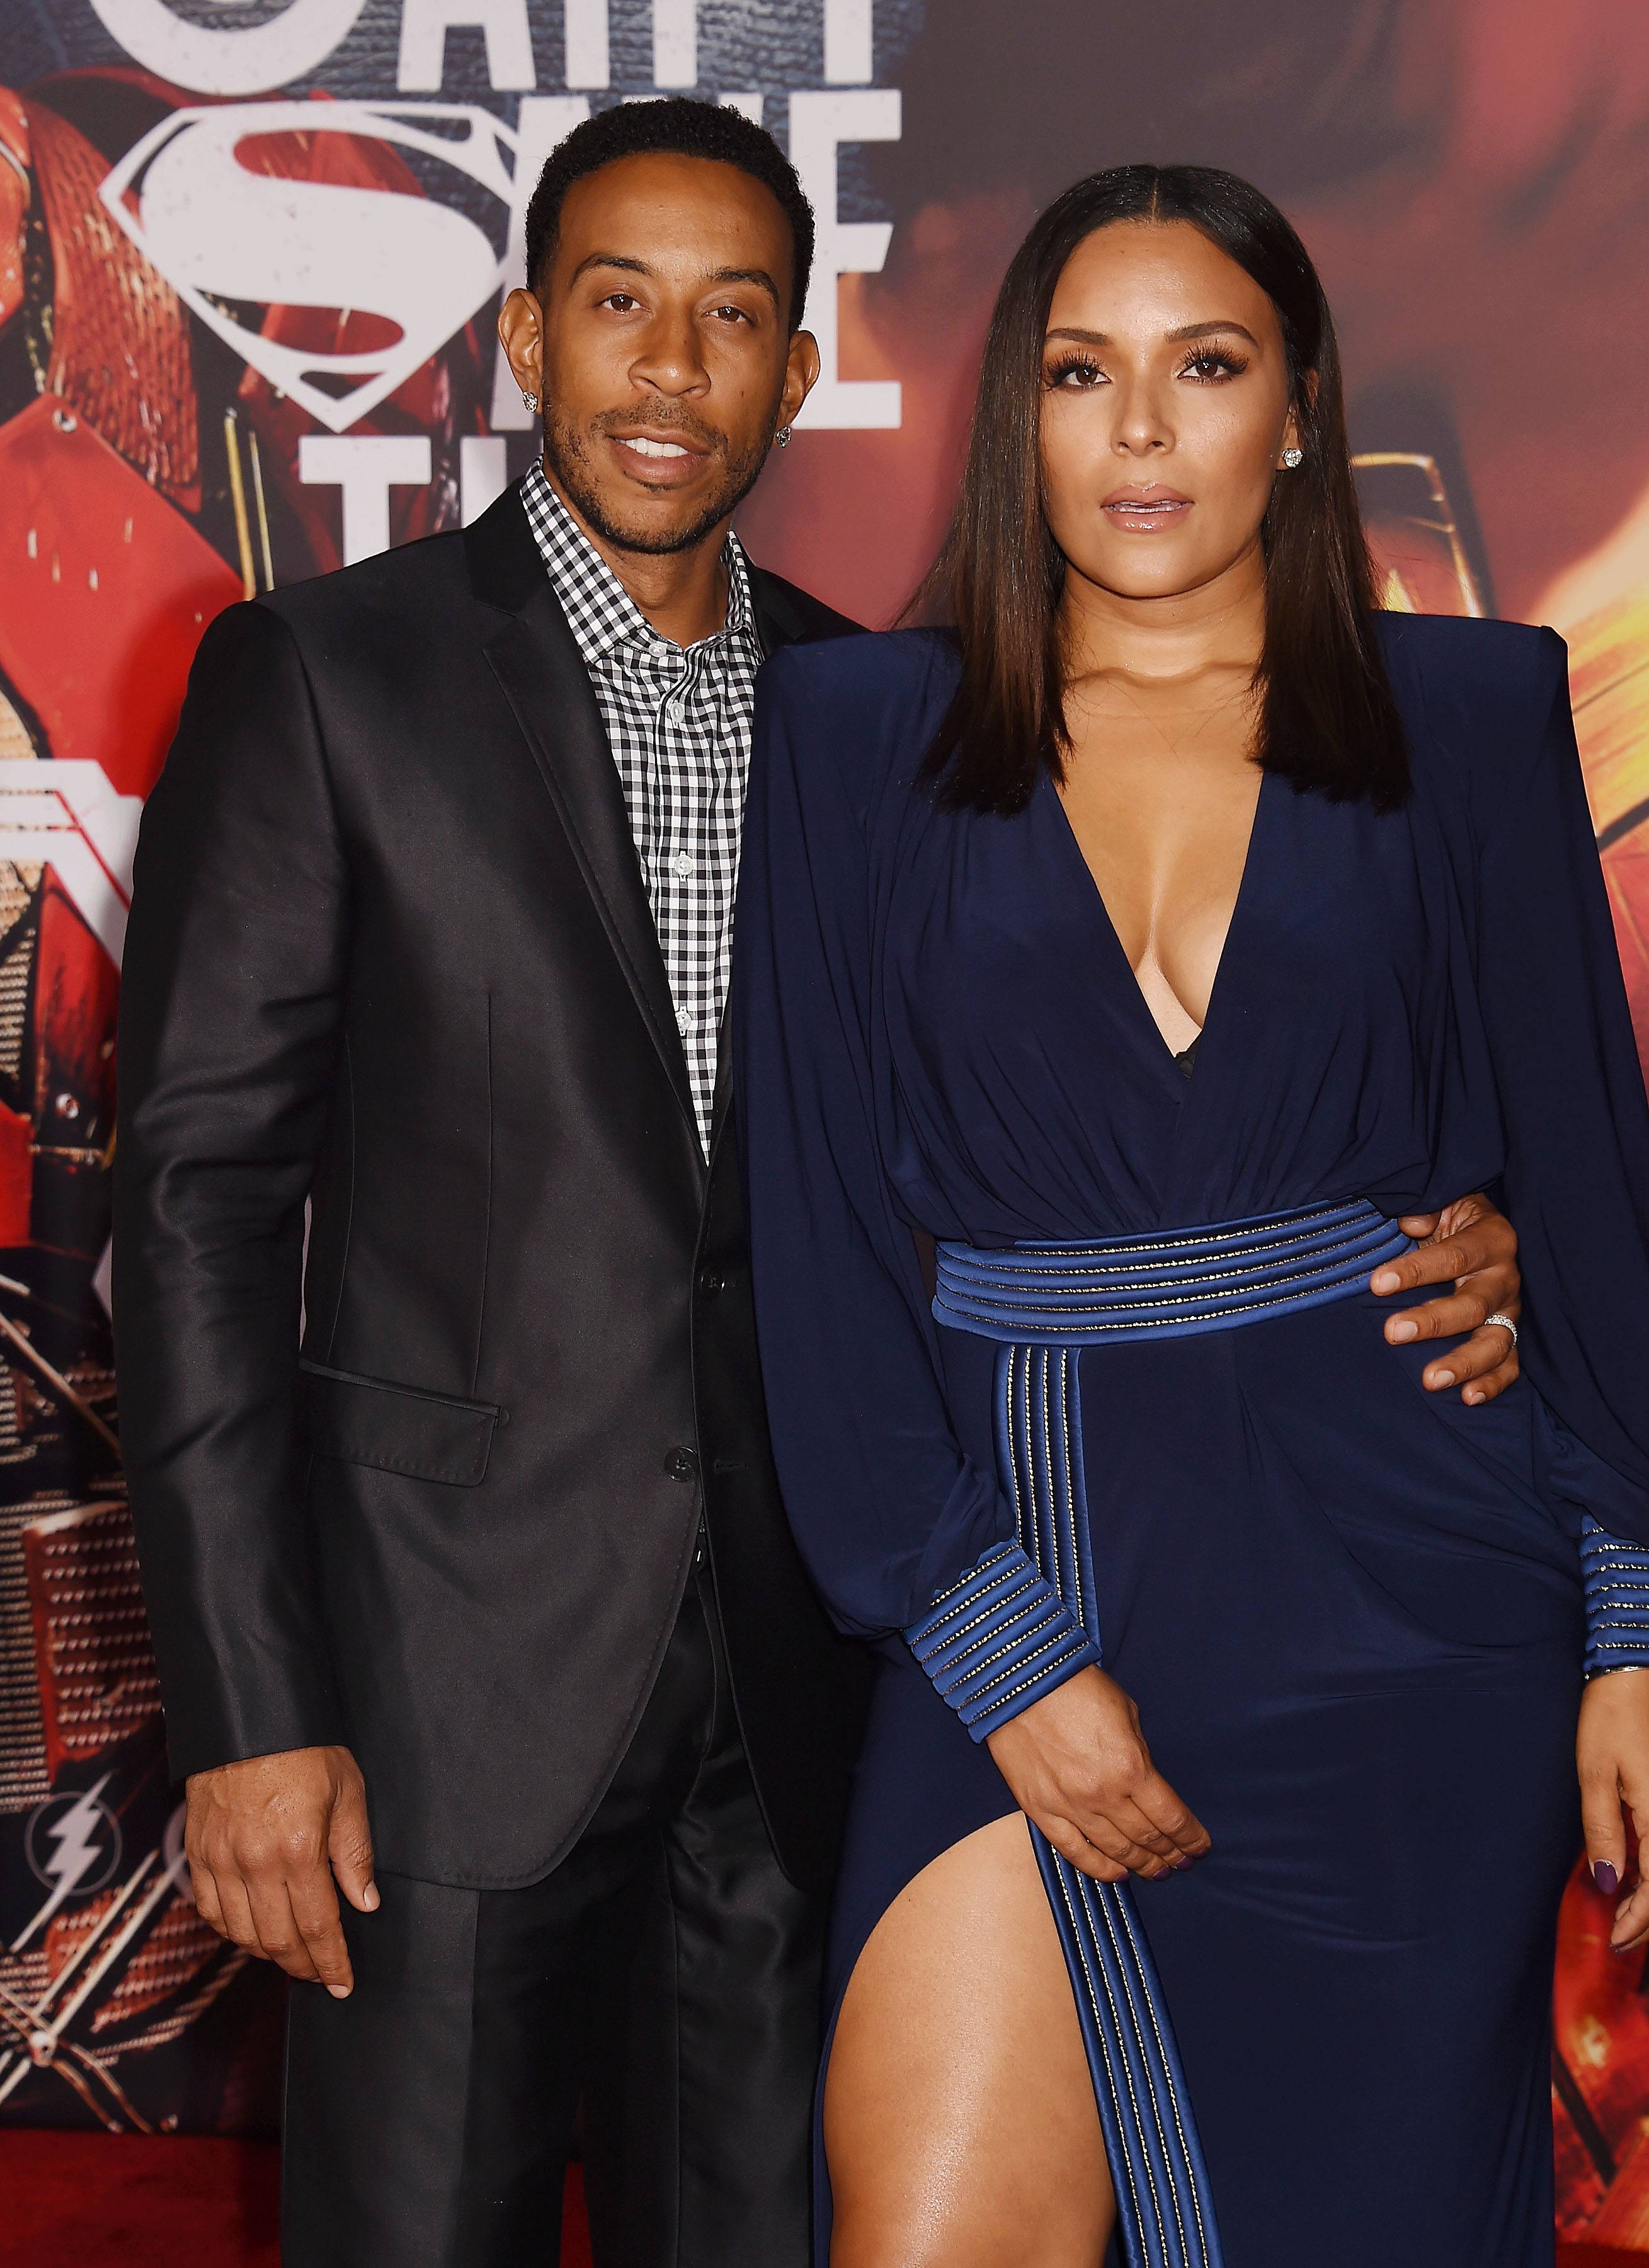 Ludacris and beautiful pregnant wife Eudoxie at secret garden